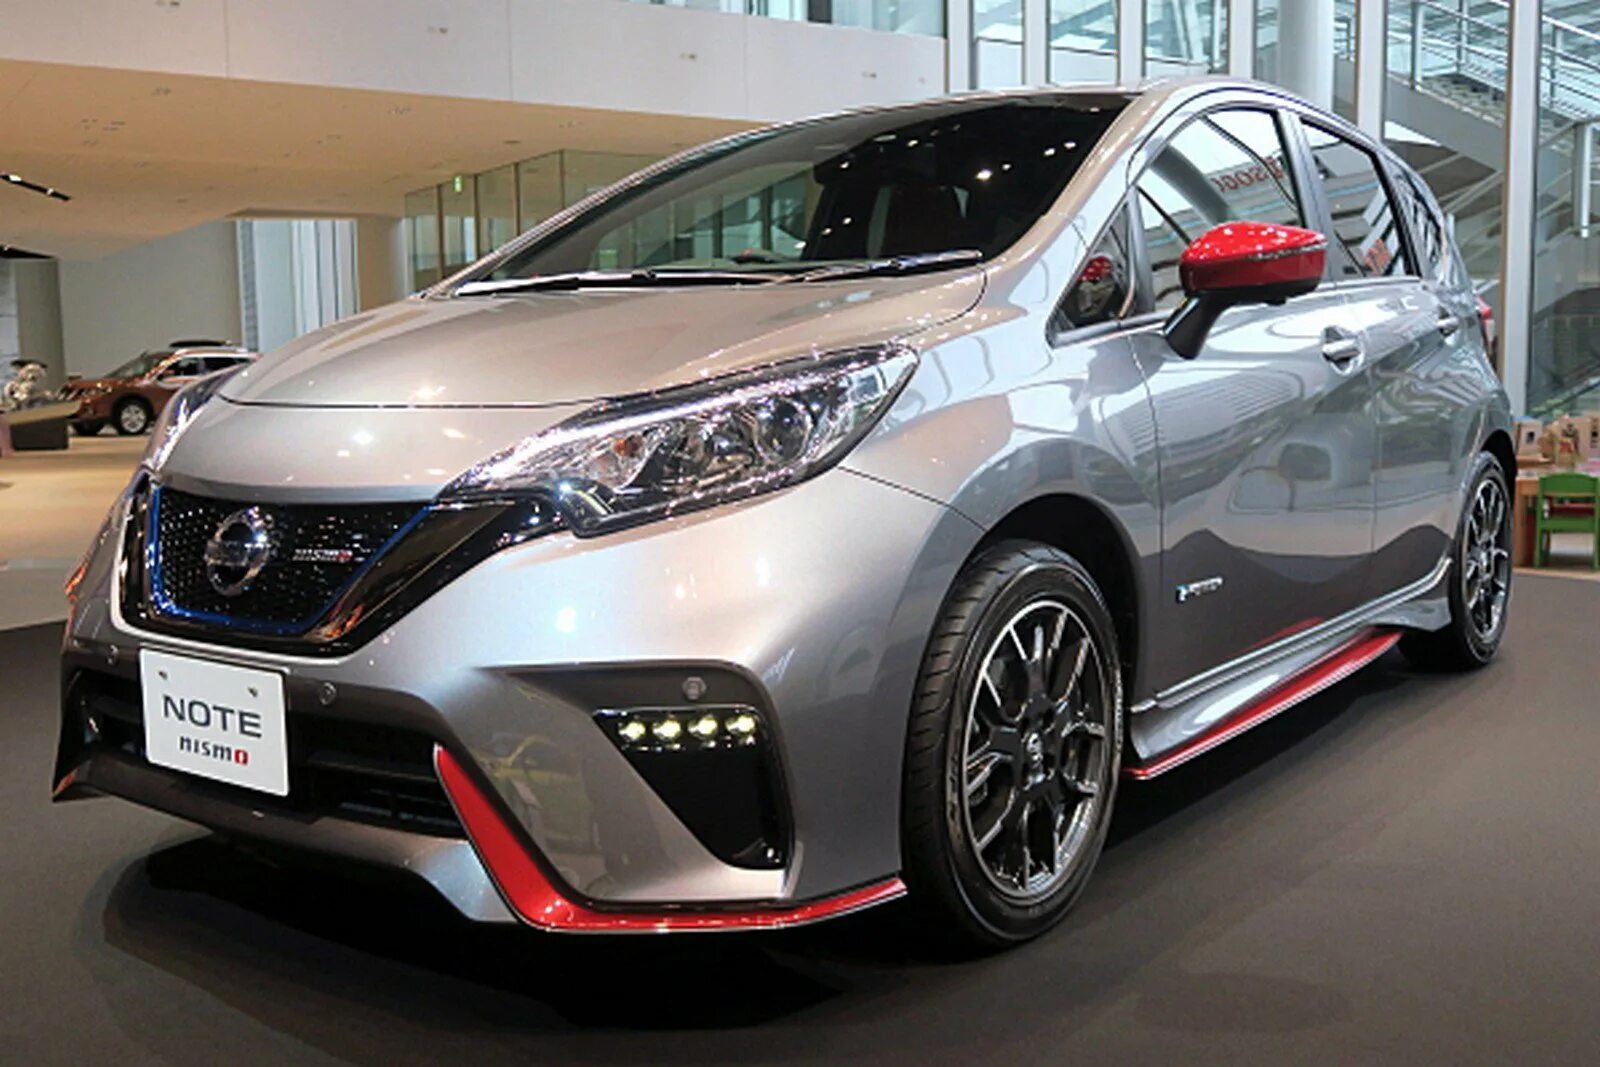 Nissan Note e Power Nismo 2017. Nissan Note 2020 Nismo. Nissan Note 2017. Nissan Note 2017 гибрид.